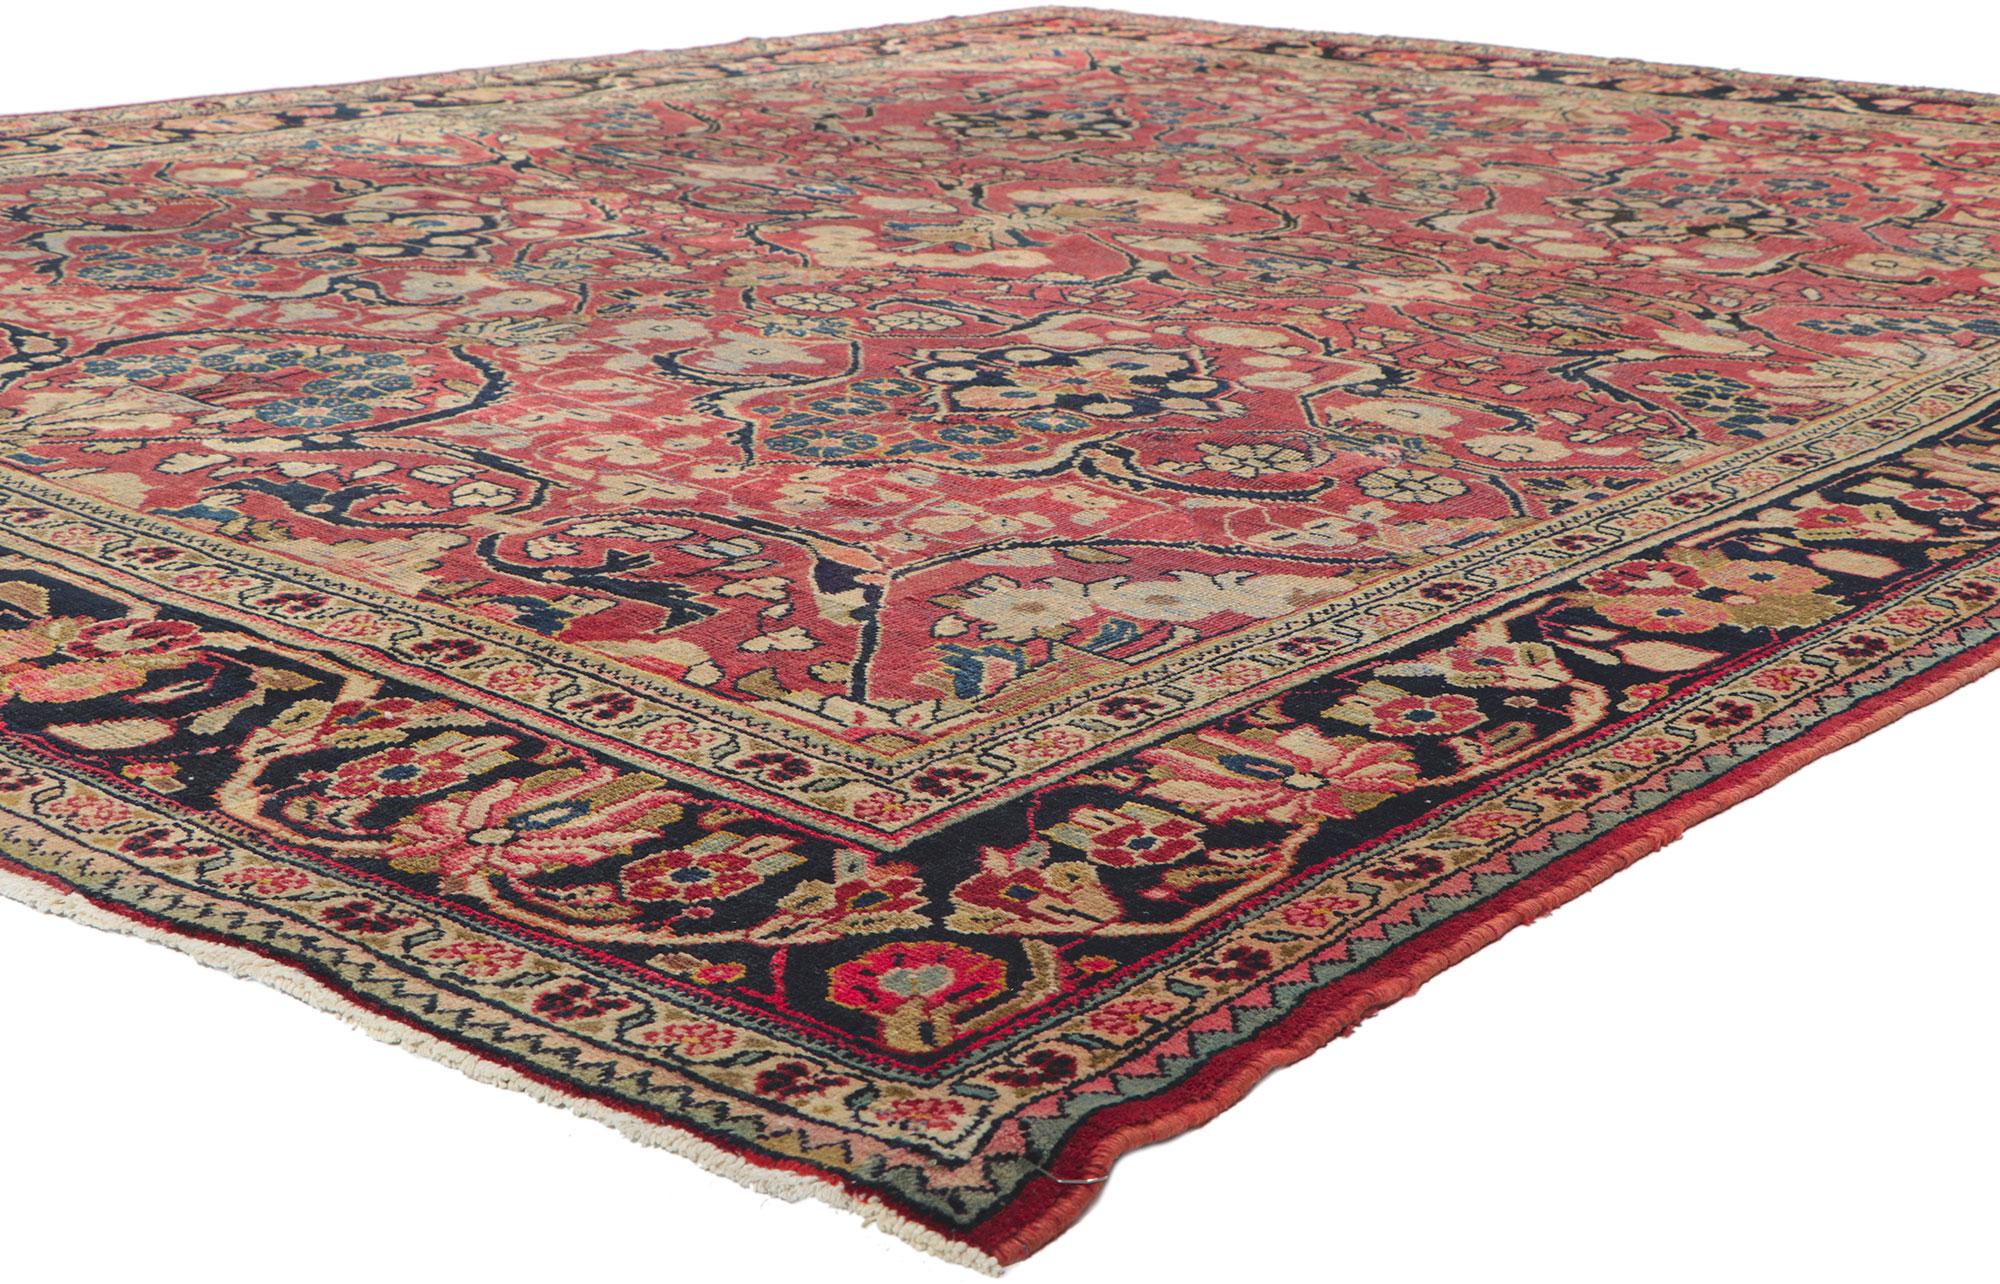 61168 Antique Persian Mahal rug 09'00 x 11'07. ?With timeless appeal, ornate decorative detailing, and effortless beauty, this hand knotted wool antique Persian Mahal rug is poised to impress. The abrashed field is covered in an all-over botanical